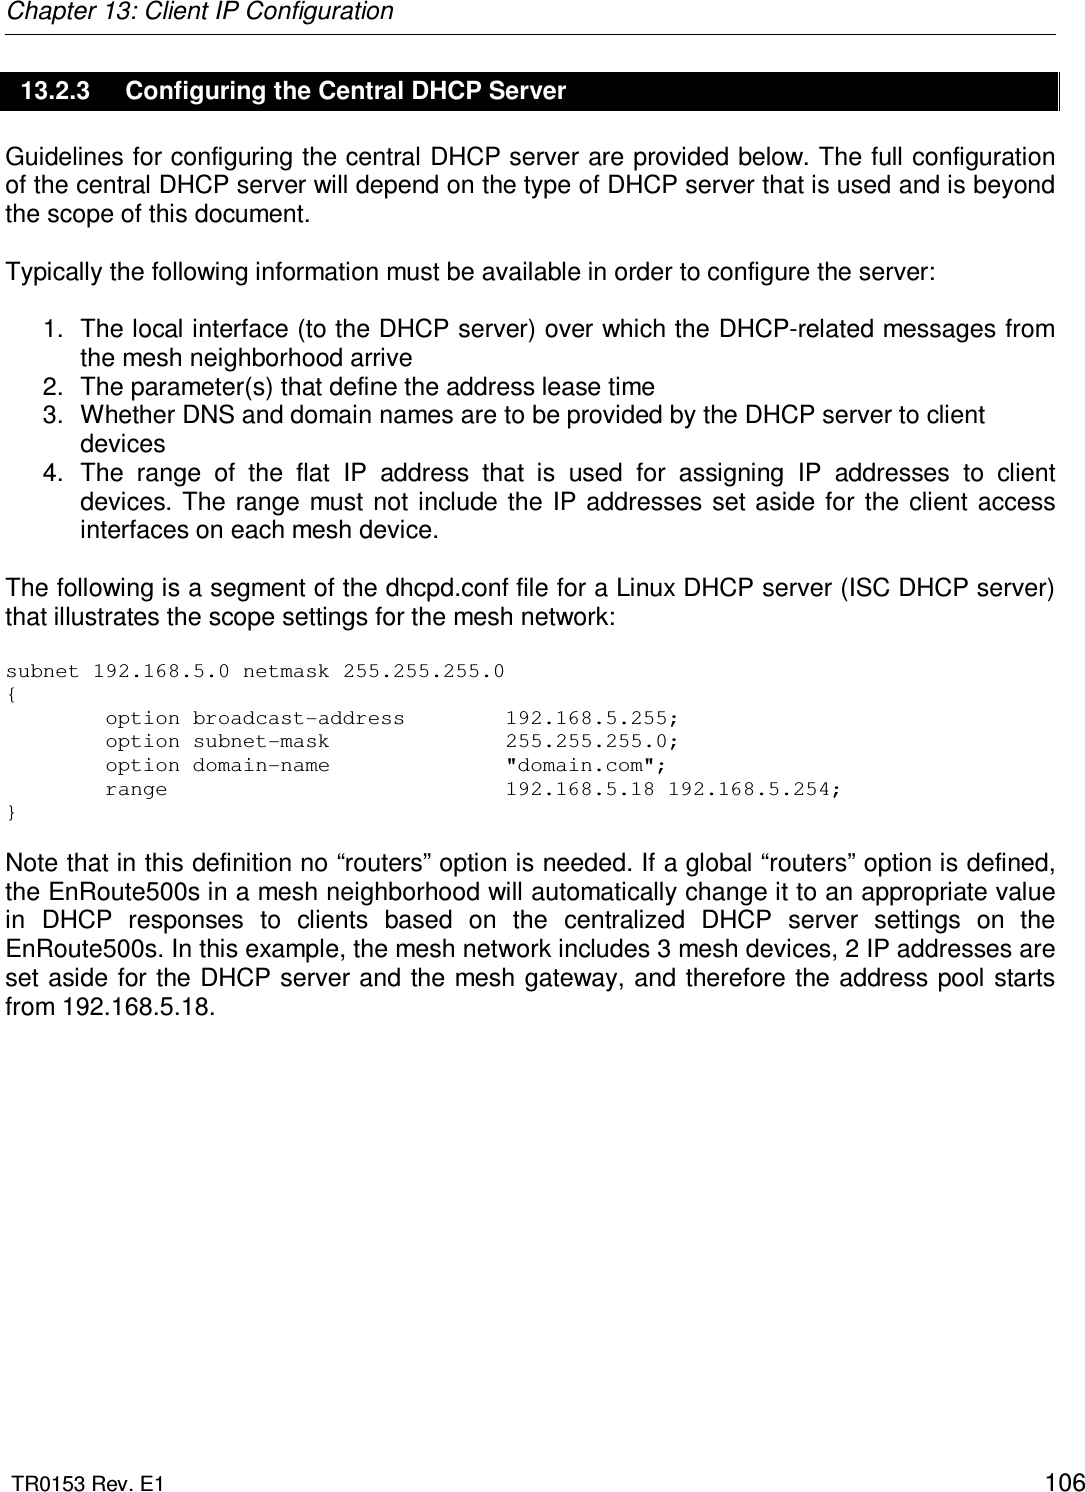 Chapter 13: Client IP Configuration  TR0153 Rev. E1    106 13.2.3  Configuring the Central DHCP Server Guidelines for configuring the central DHCP server are provided below. The full configuration of the central DHCP server will depend on the type of DHCP server that is used and is beyond the scope of this document.   Typically the following information must be available in order to configure the server:  1.  The local interface (to the DHCP server) over which the DHCP-related messages from the mesh neighborhood arrive 2.  The parameter(s) that define the address lease time  3.  Whether DNS and domain names are to be provided by the DHCP server to client devices 4.  The  range  of  the  flat  IP  address  that  is  used  for  assigning  IP  addresses  to  client devices. The  range  must  not  include the  IP addresses  set aside  for the client access interfaces on each mesh device.  The following is a segment of the dhcpd.conf file for a Linux DHCP server (ISC DHCP server) that illustrates the scope settings for the mesh network:  subnet 192.168.5.0 netmask 255.255.255.0 {         option broadcast-address        192.168.5.255;         option subnet-mask              255.255.255.0;         option domain-name              &quot;domain.com&quot;;         range                           192.168.5.18 192.168.5.254; }   Note that in this definition no “routers” option is needed. If a global “routers” option is defined, the EnRoute500s in a mesh neighborhood will automatically change it to an appropriate value in  DHCP  responses  to  clients  based  on  the  centralized  DHCP  server  settings  on  the EnRoute500s. In this example, the mesh network includes 3 mesh devices, 2 IP addresses are set aside for the DHCP server and the mesh gateway, and therefore the address pool starts from 192.168.5.18. 